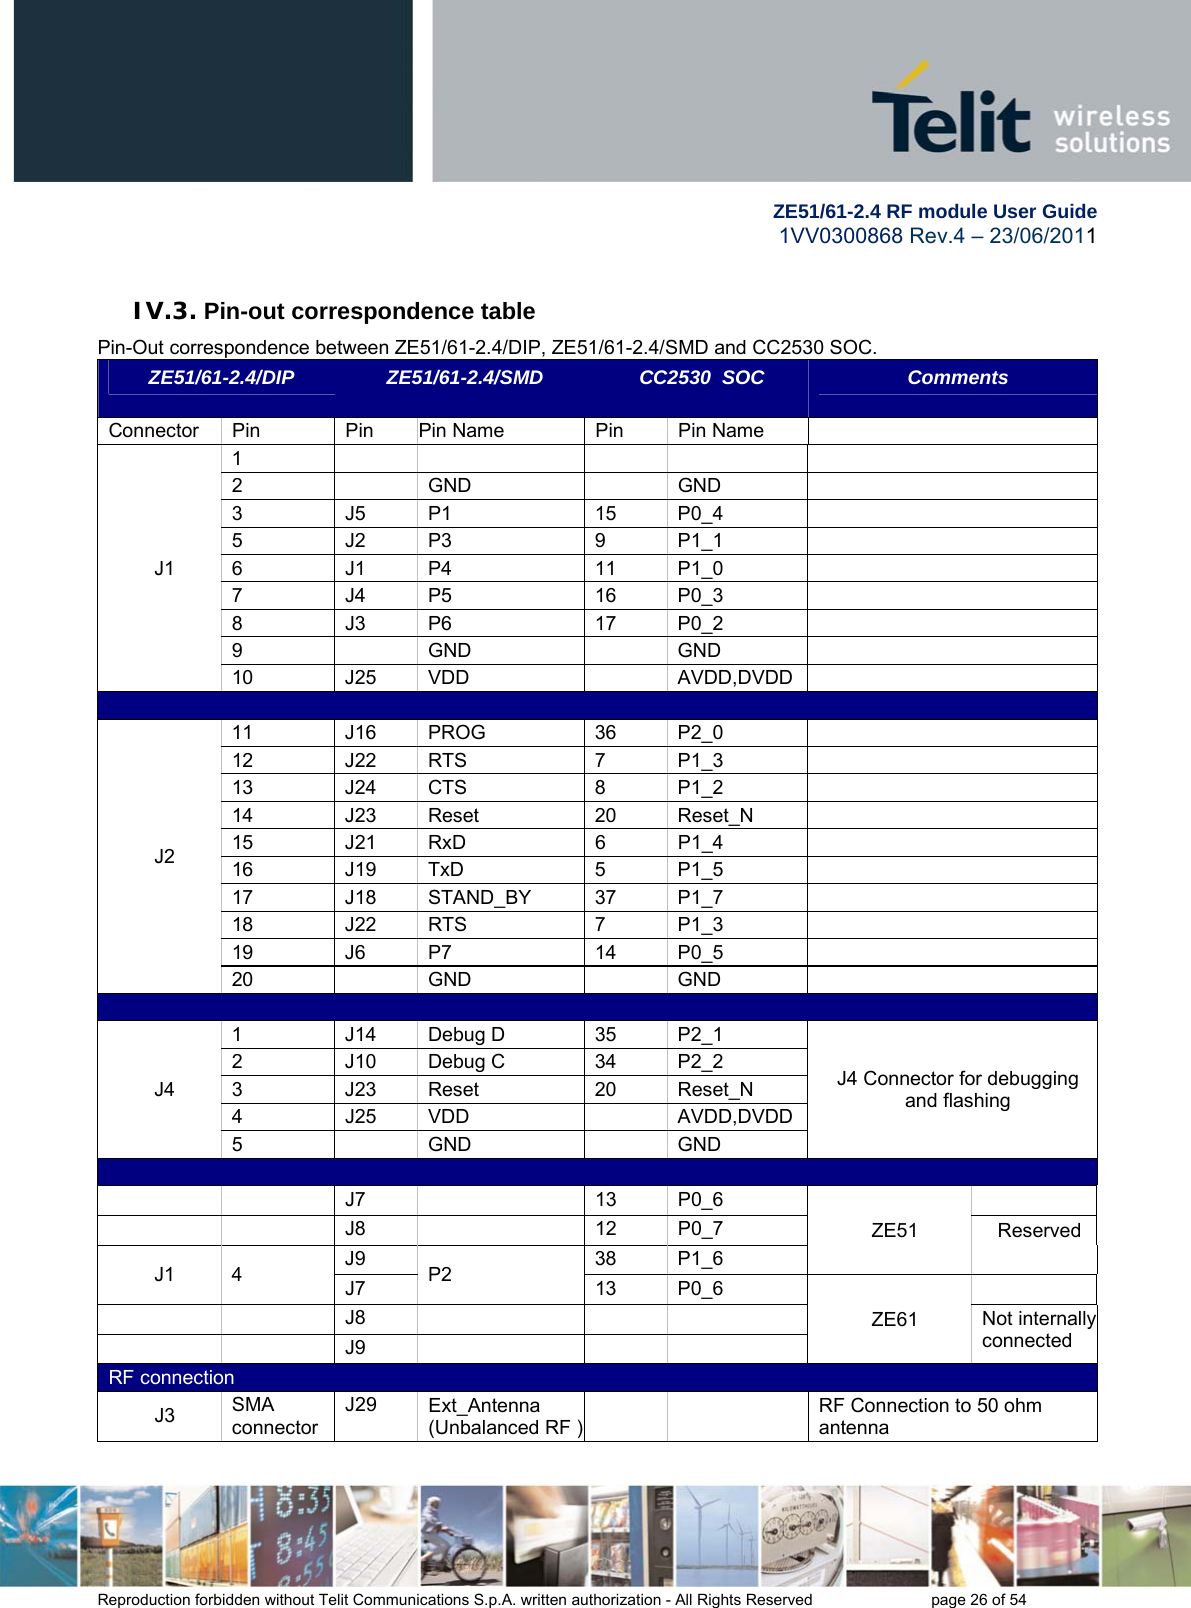         ZE51/61-2.4 RF module User Guide 1VV0300868 Rev.4 – 23/06/2011 Reproduction forbidden without Telit Communications S.p.A. written authorization - All Rights Reserved    page 26 of 54  IV.3. Pin-out correspondence table Pin-Out correspondence between ZE51/61-2.4/DIP, ZE51/61-2.4/SMD and CC2530 SOC. ZE51/61-2.4/DIP  ZE51/61-2.4/SMD  CC2530  SOC  Comments Connector Pin   Pin Pin Name  Pin Pin Name  J1 1        2  GND   GND  3 J5 P1  15 P0_4  5 J2 P3  9 P1_1  6 J1 P4  11 P1_0  7 J4 P5  16 P0_3  8 J3 P6  17 P0_2  9  GND   GND  10 J25 VDD   AVDD,DVDD   J2 11 J16 PROG  36 P2_0   12 J22 RTS  7 P1_3   13 J24 CTS  8 P1_2   14 J23 Reset  20 Reset_N  15 J21 RxD  6 P1_4   16 J19 TxD  5 P1_5   17 J18 STAND_BY 37 P1_7   18 J22 RTS  7 P1_3   19 J6 P7  14 P0_5   20  GND   GND    J4 1 J14 Debug D 35 P2_1 J4 Connector for debugging and flashing 2 J10 Debug C 34 P2_2 3 J23 Reset  20 Reset_N 4 J25 VDD   AVDD,DVDD 5  GND   GND    J7   13 P0_6 ZE51    J8   12 P0_7  Reserved J1 4  J9  P2  38 P1_6   J7 13 P0_6 ZE61    J8      Not internally connected   J9     RF connection J3  SMA connector  J29  Ext_Antenna (Unbalanced RF )   RF Connection to 50 ohm antenna 